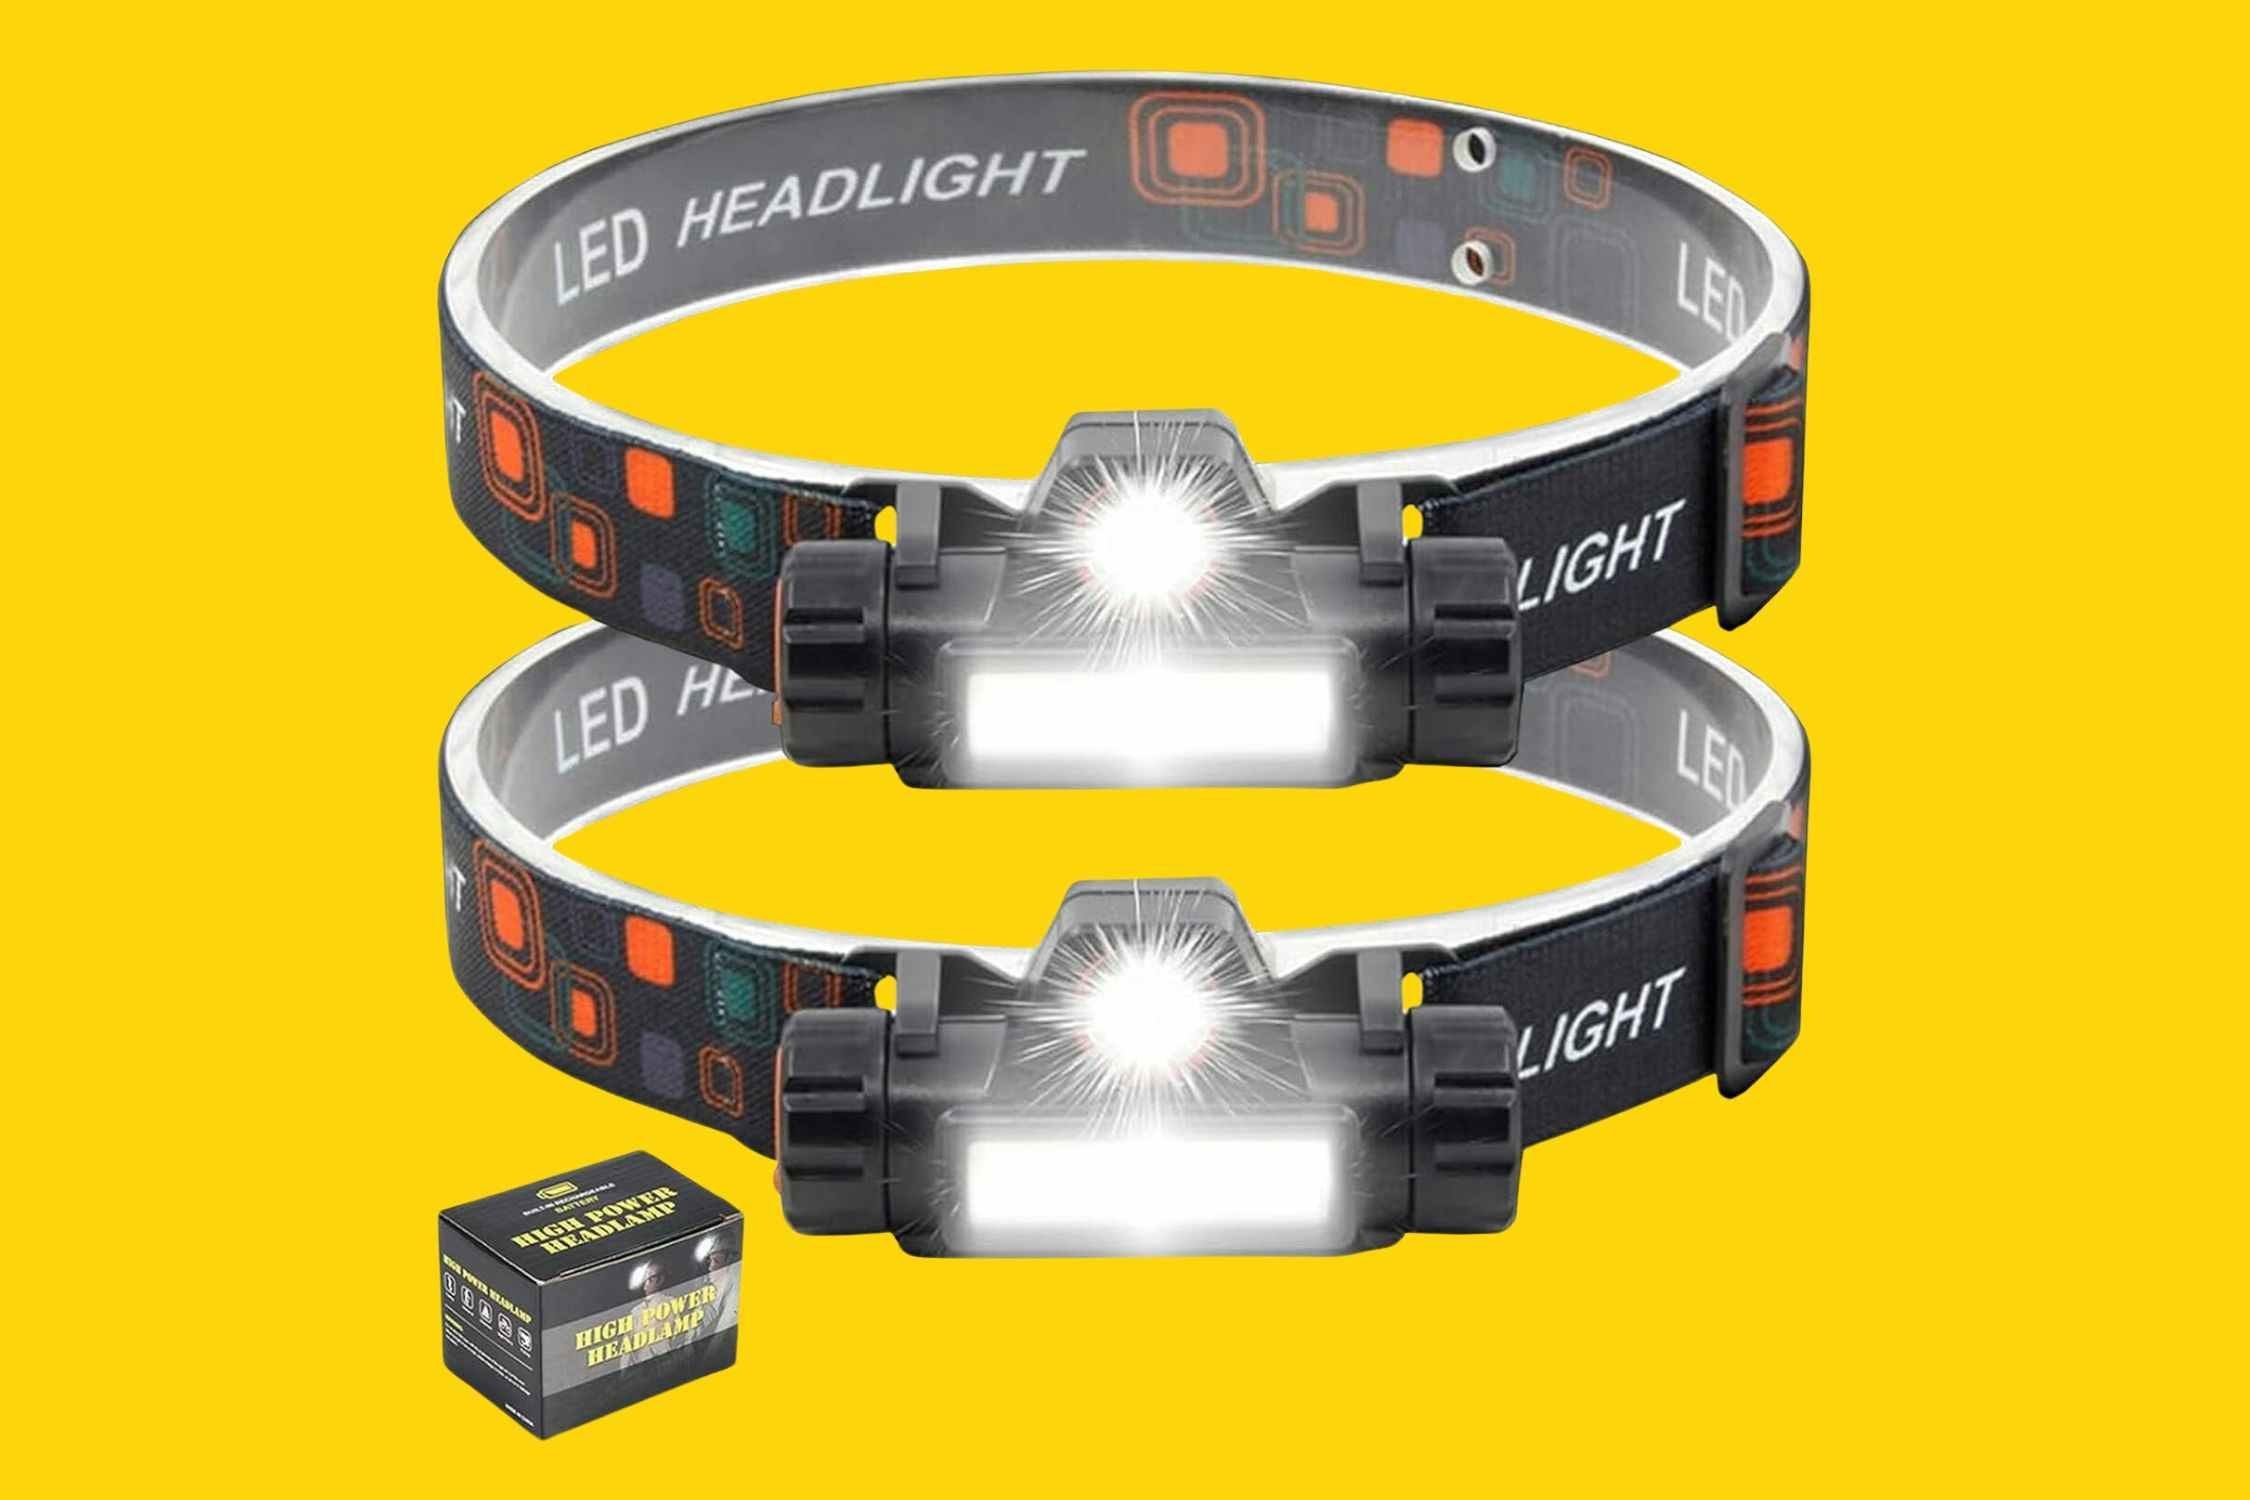 Rechargeable Headlamps 2-Pack, Only $7.99 on Amazon